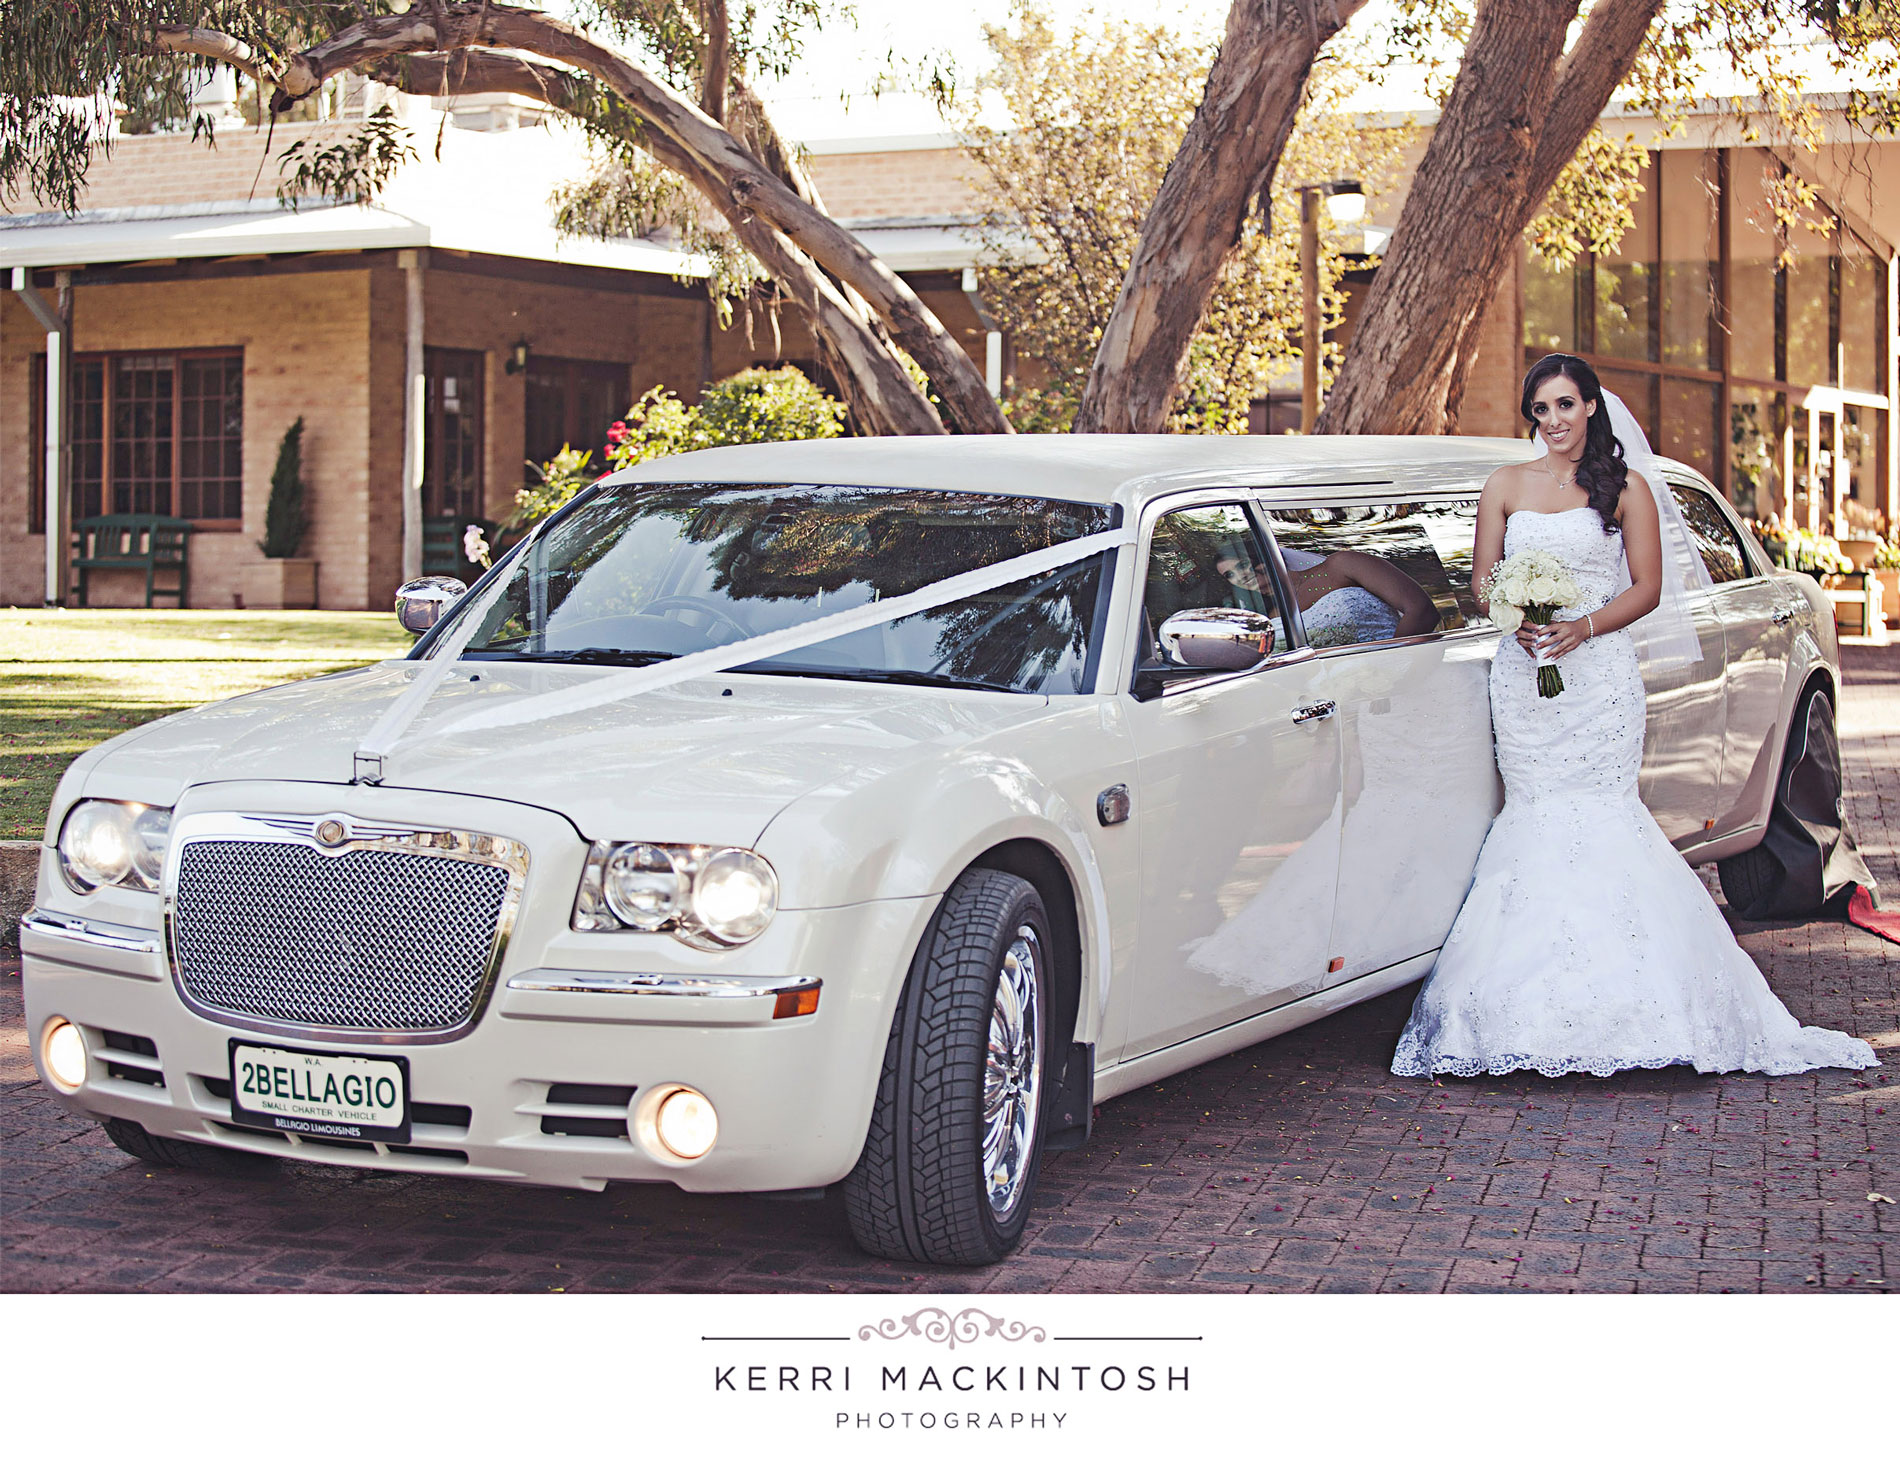 Pearl White Chrysler Limousine with Middle Entry Bridal Door - 10 Passengers (Rear) - Bellagio Limousines Perth